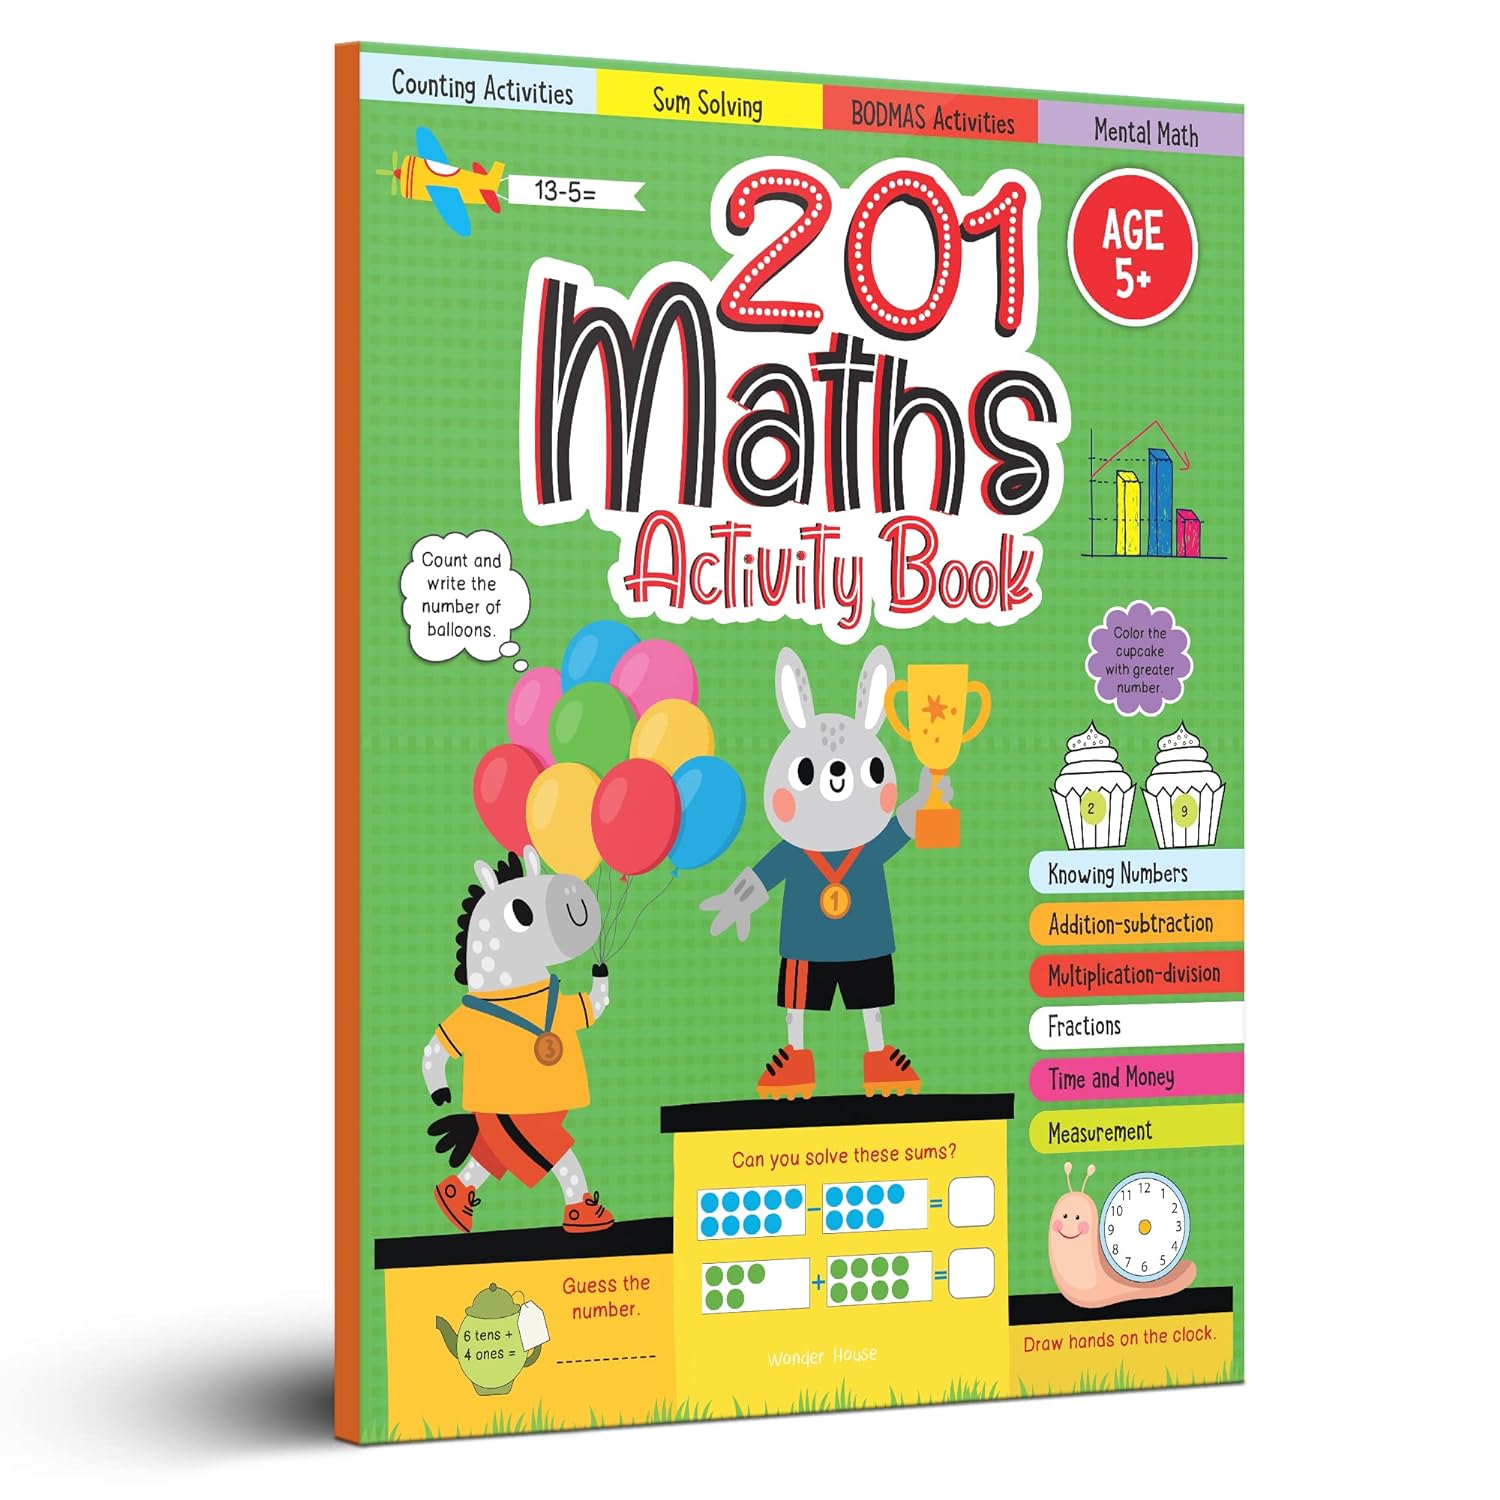 201 Maths Activity Book for Age 5+